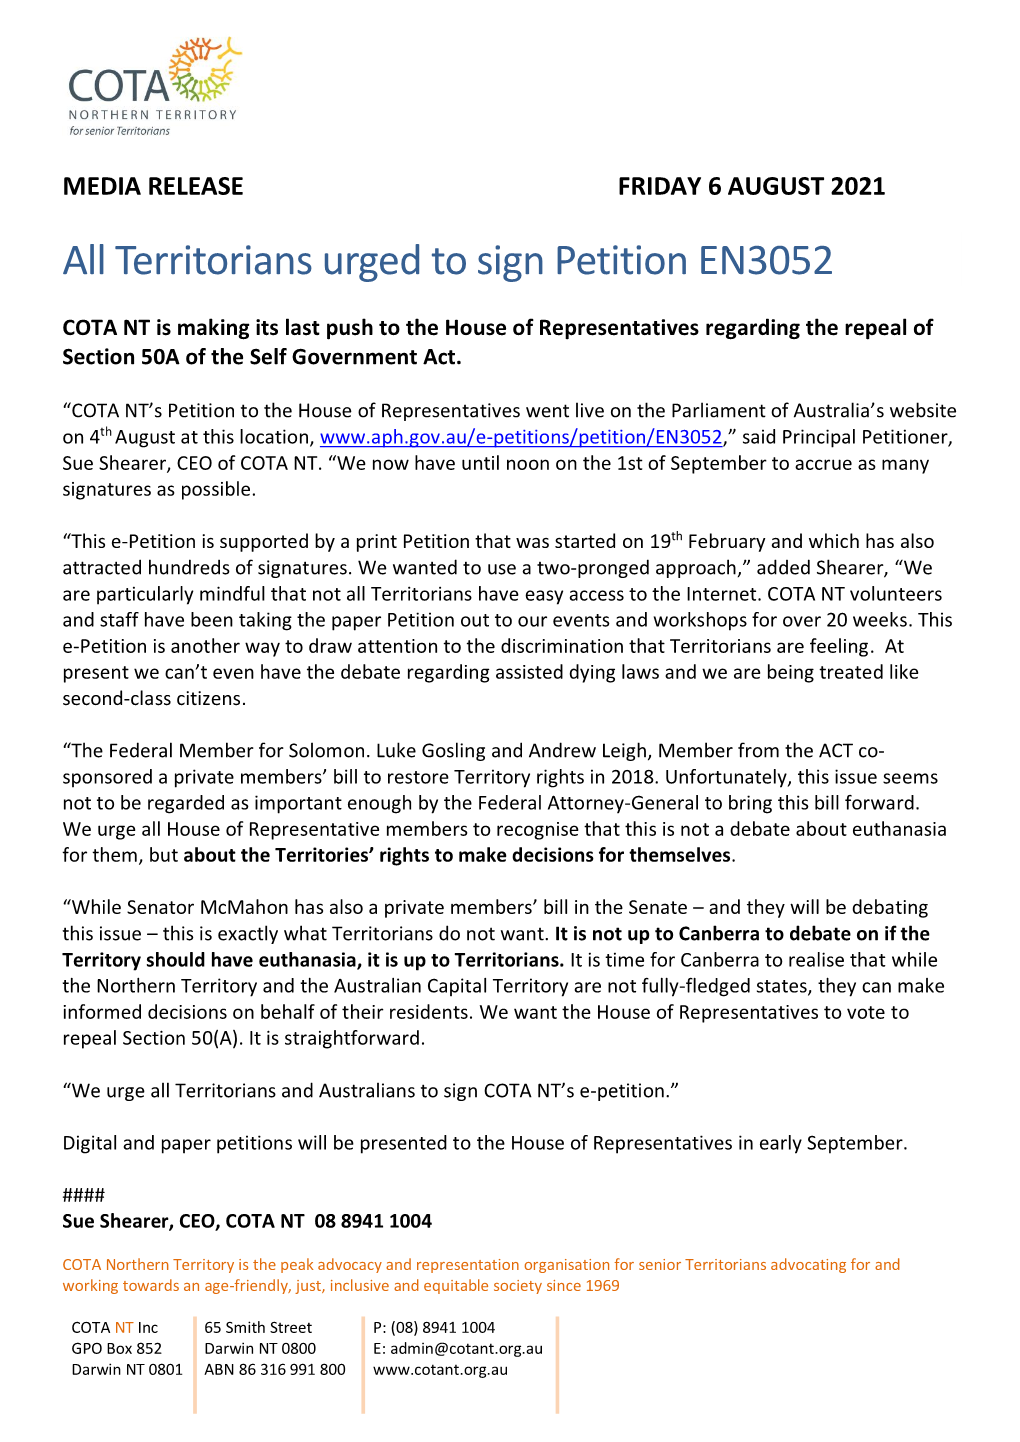 All Territorians Urged to Sign Petition EN3052